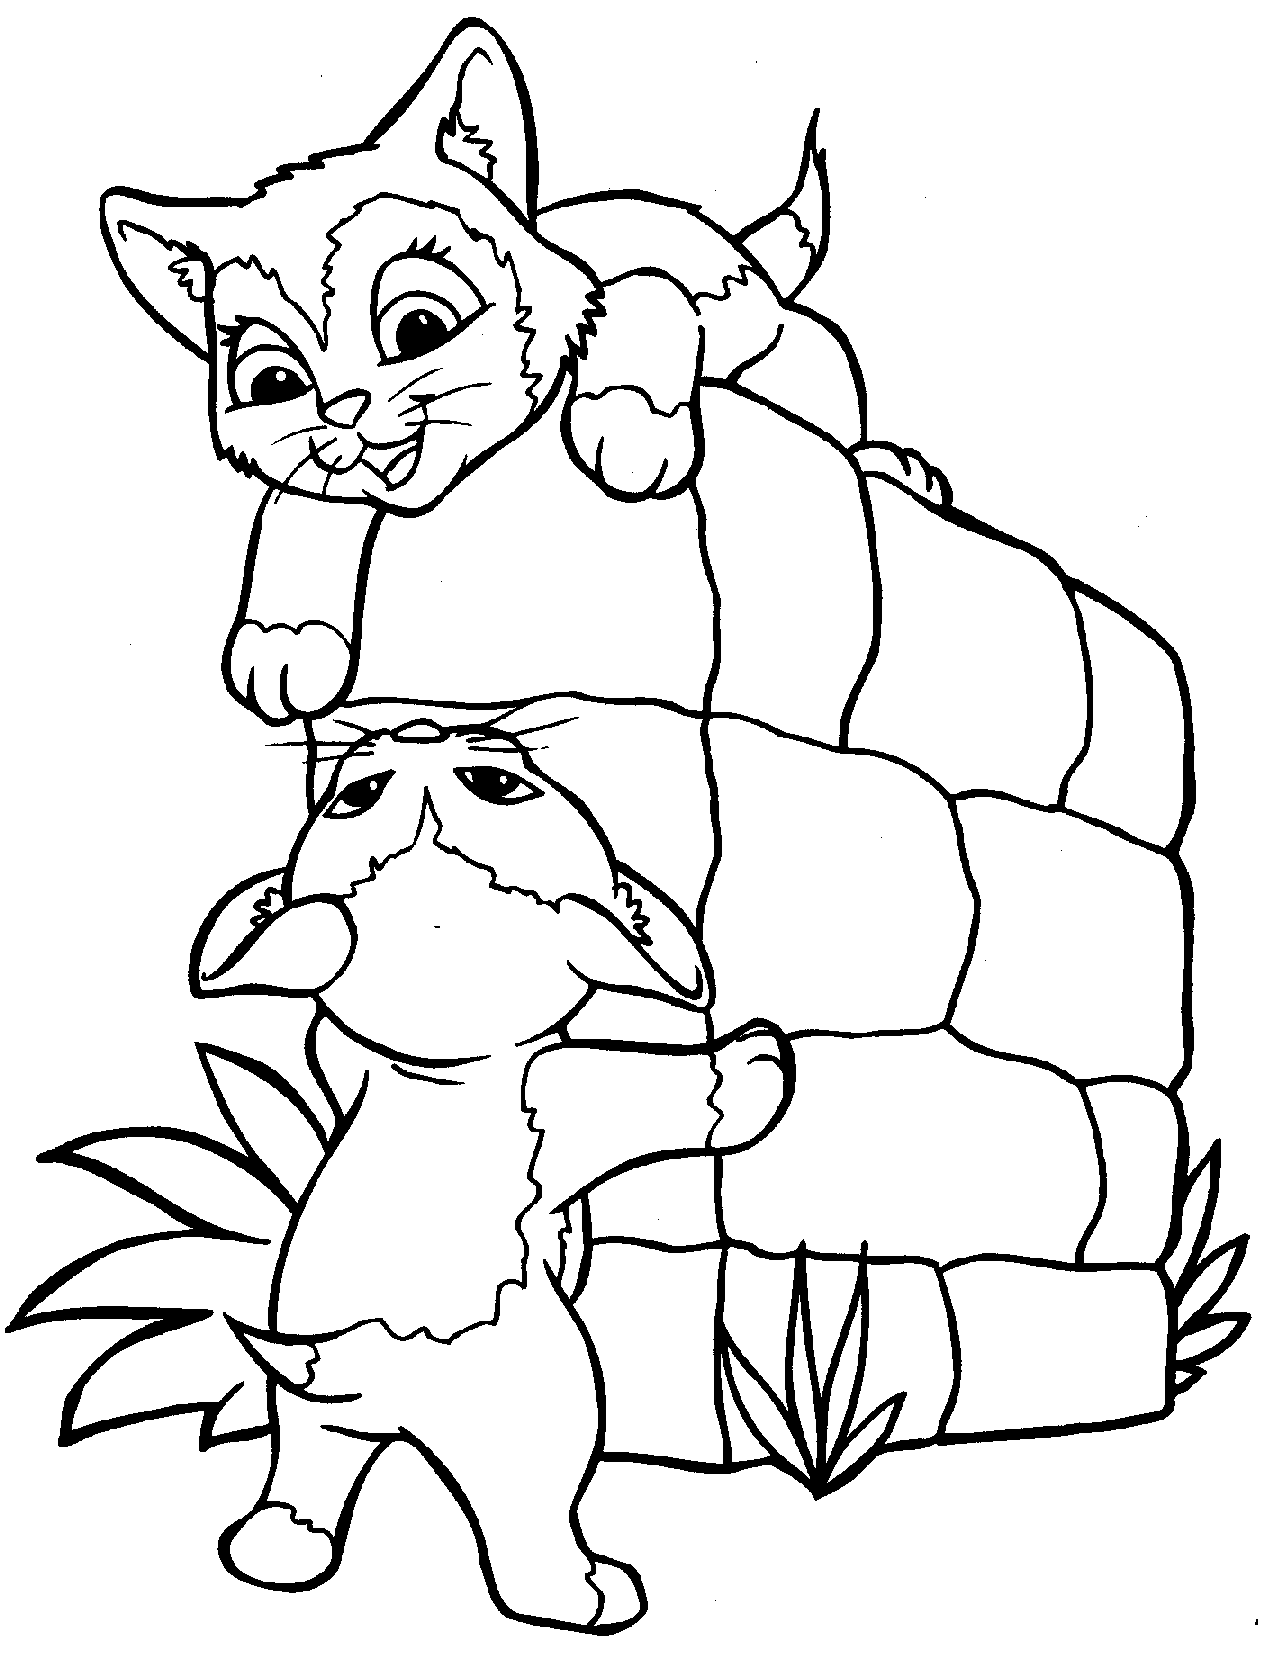 free-printable-cat-coloring-pages-for-kids-cool2bkids